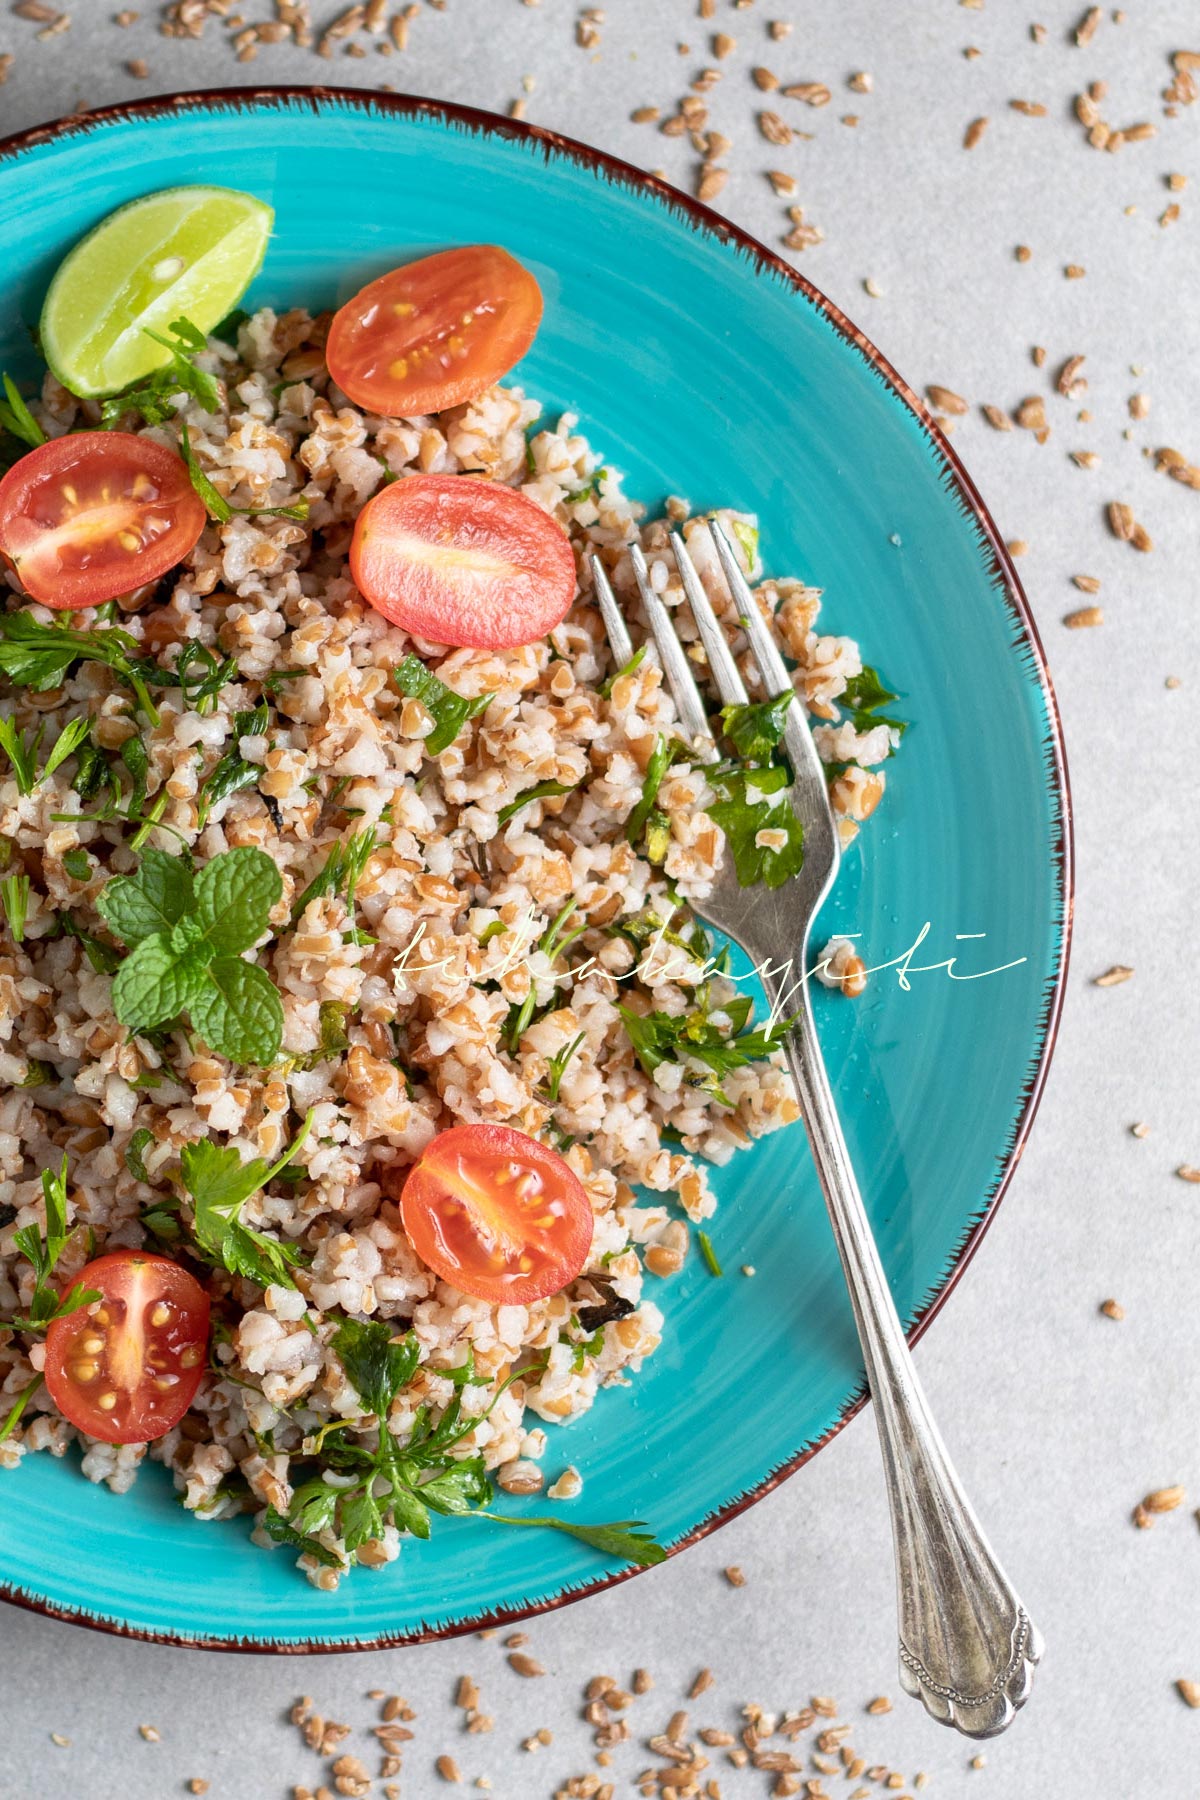 Infused with fresh parsley and peppermint leaves, his red bulgur salad is light and fluffy. And it's a breeze to make. | tchakayiti.com